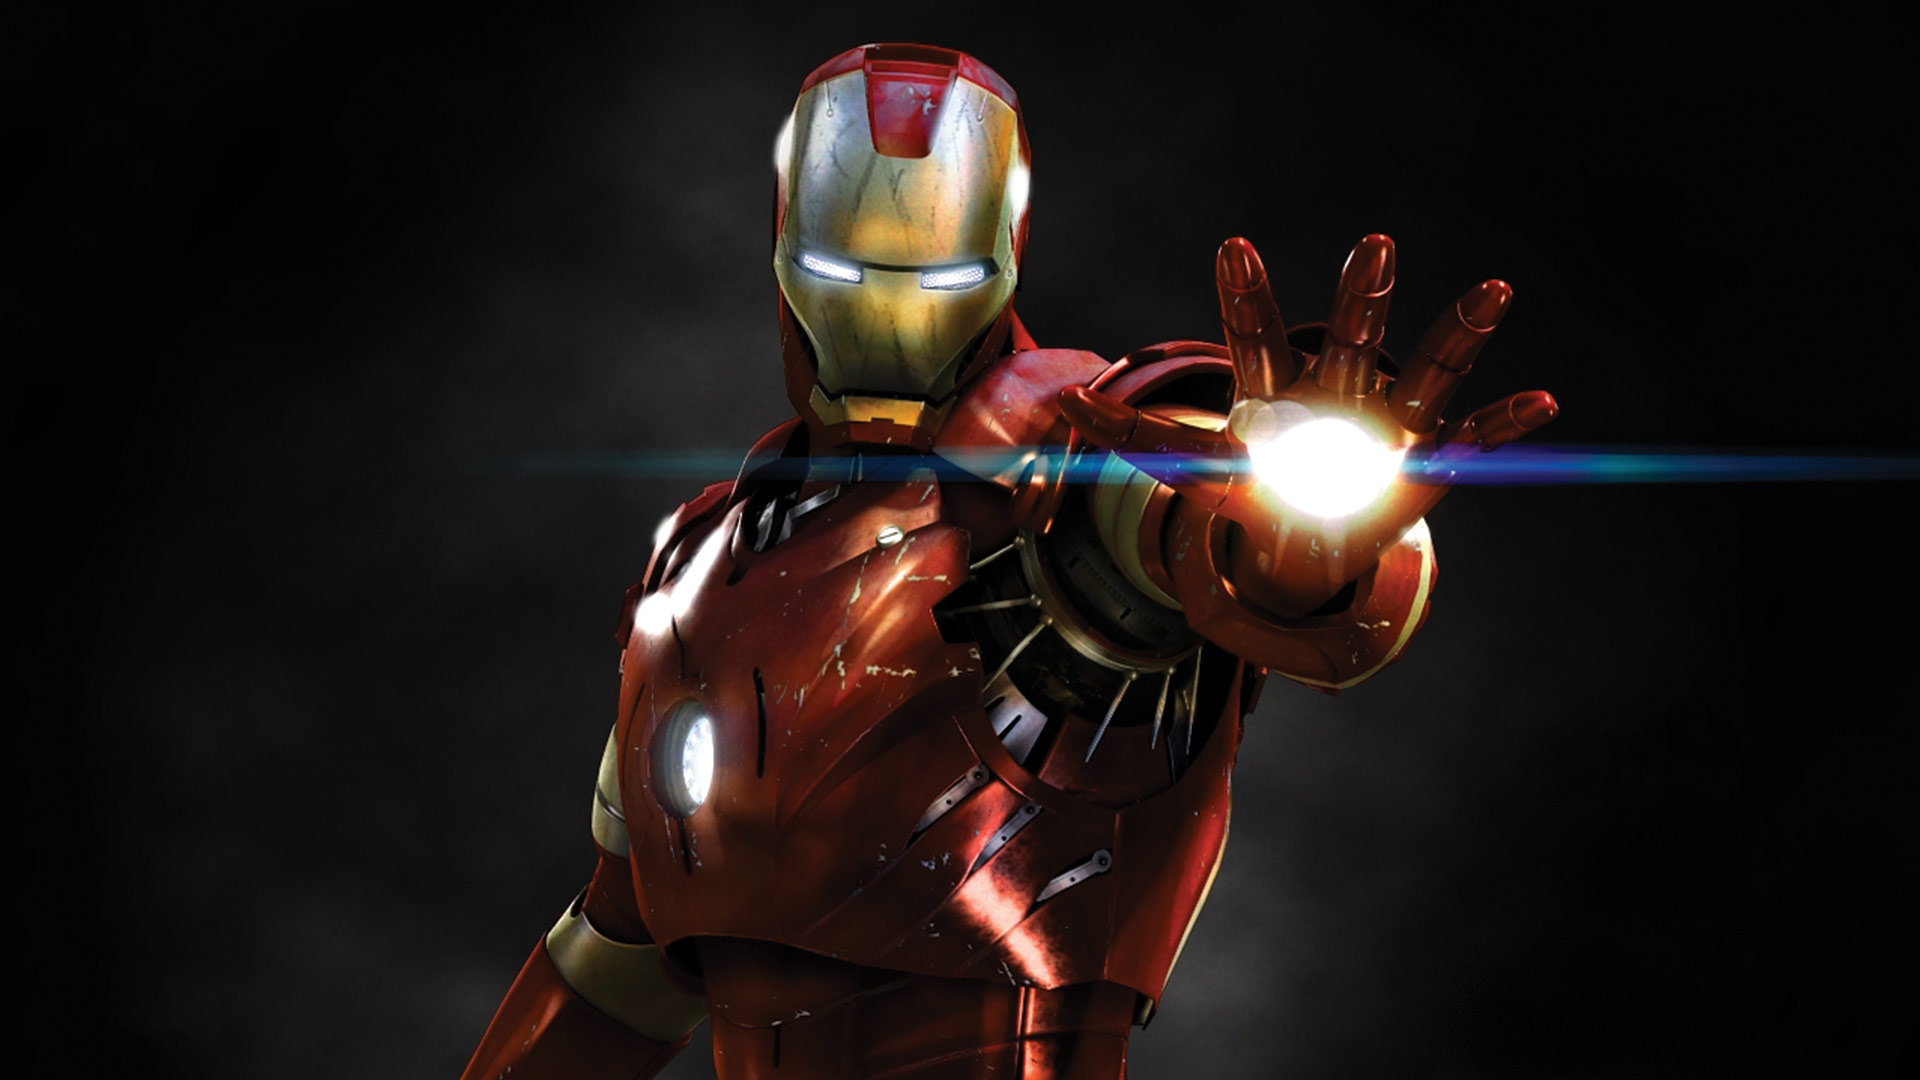 Image result for iron man